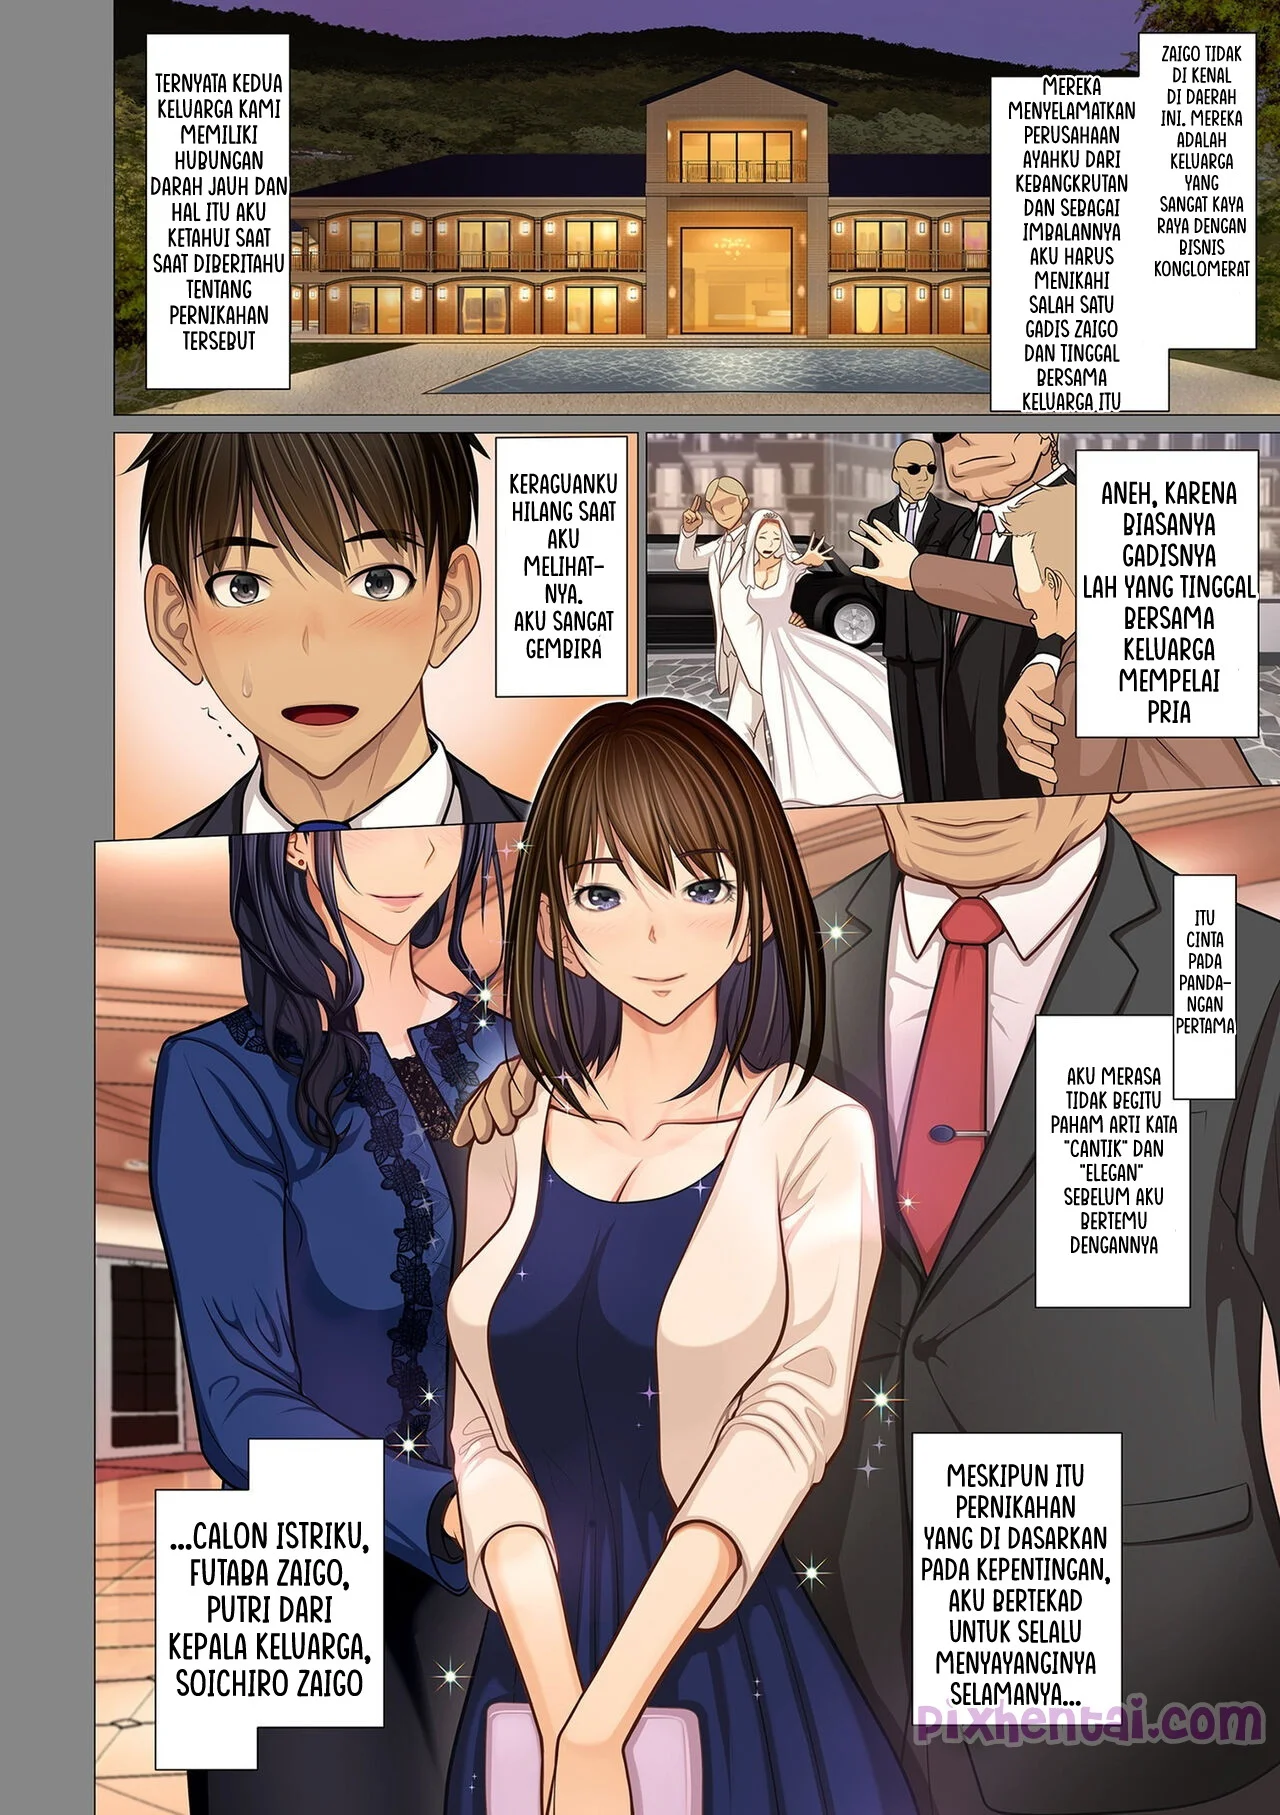 Komik hentai xxx manga sex bokep I married into a wealthy family All the women in the family except my wife are mine part 1 6